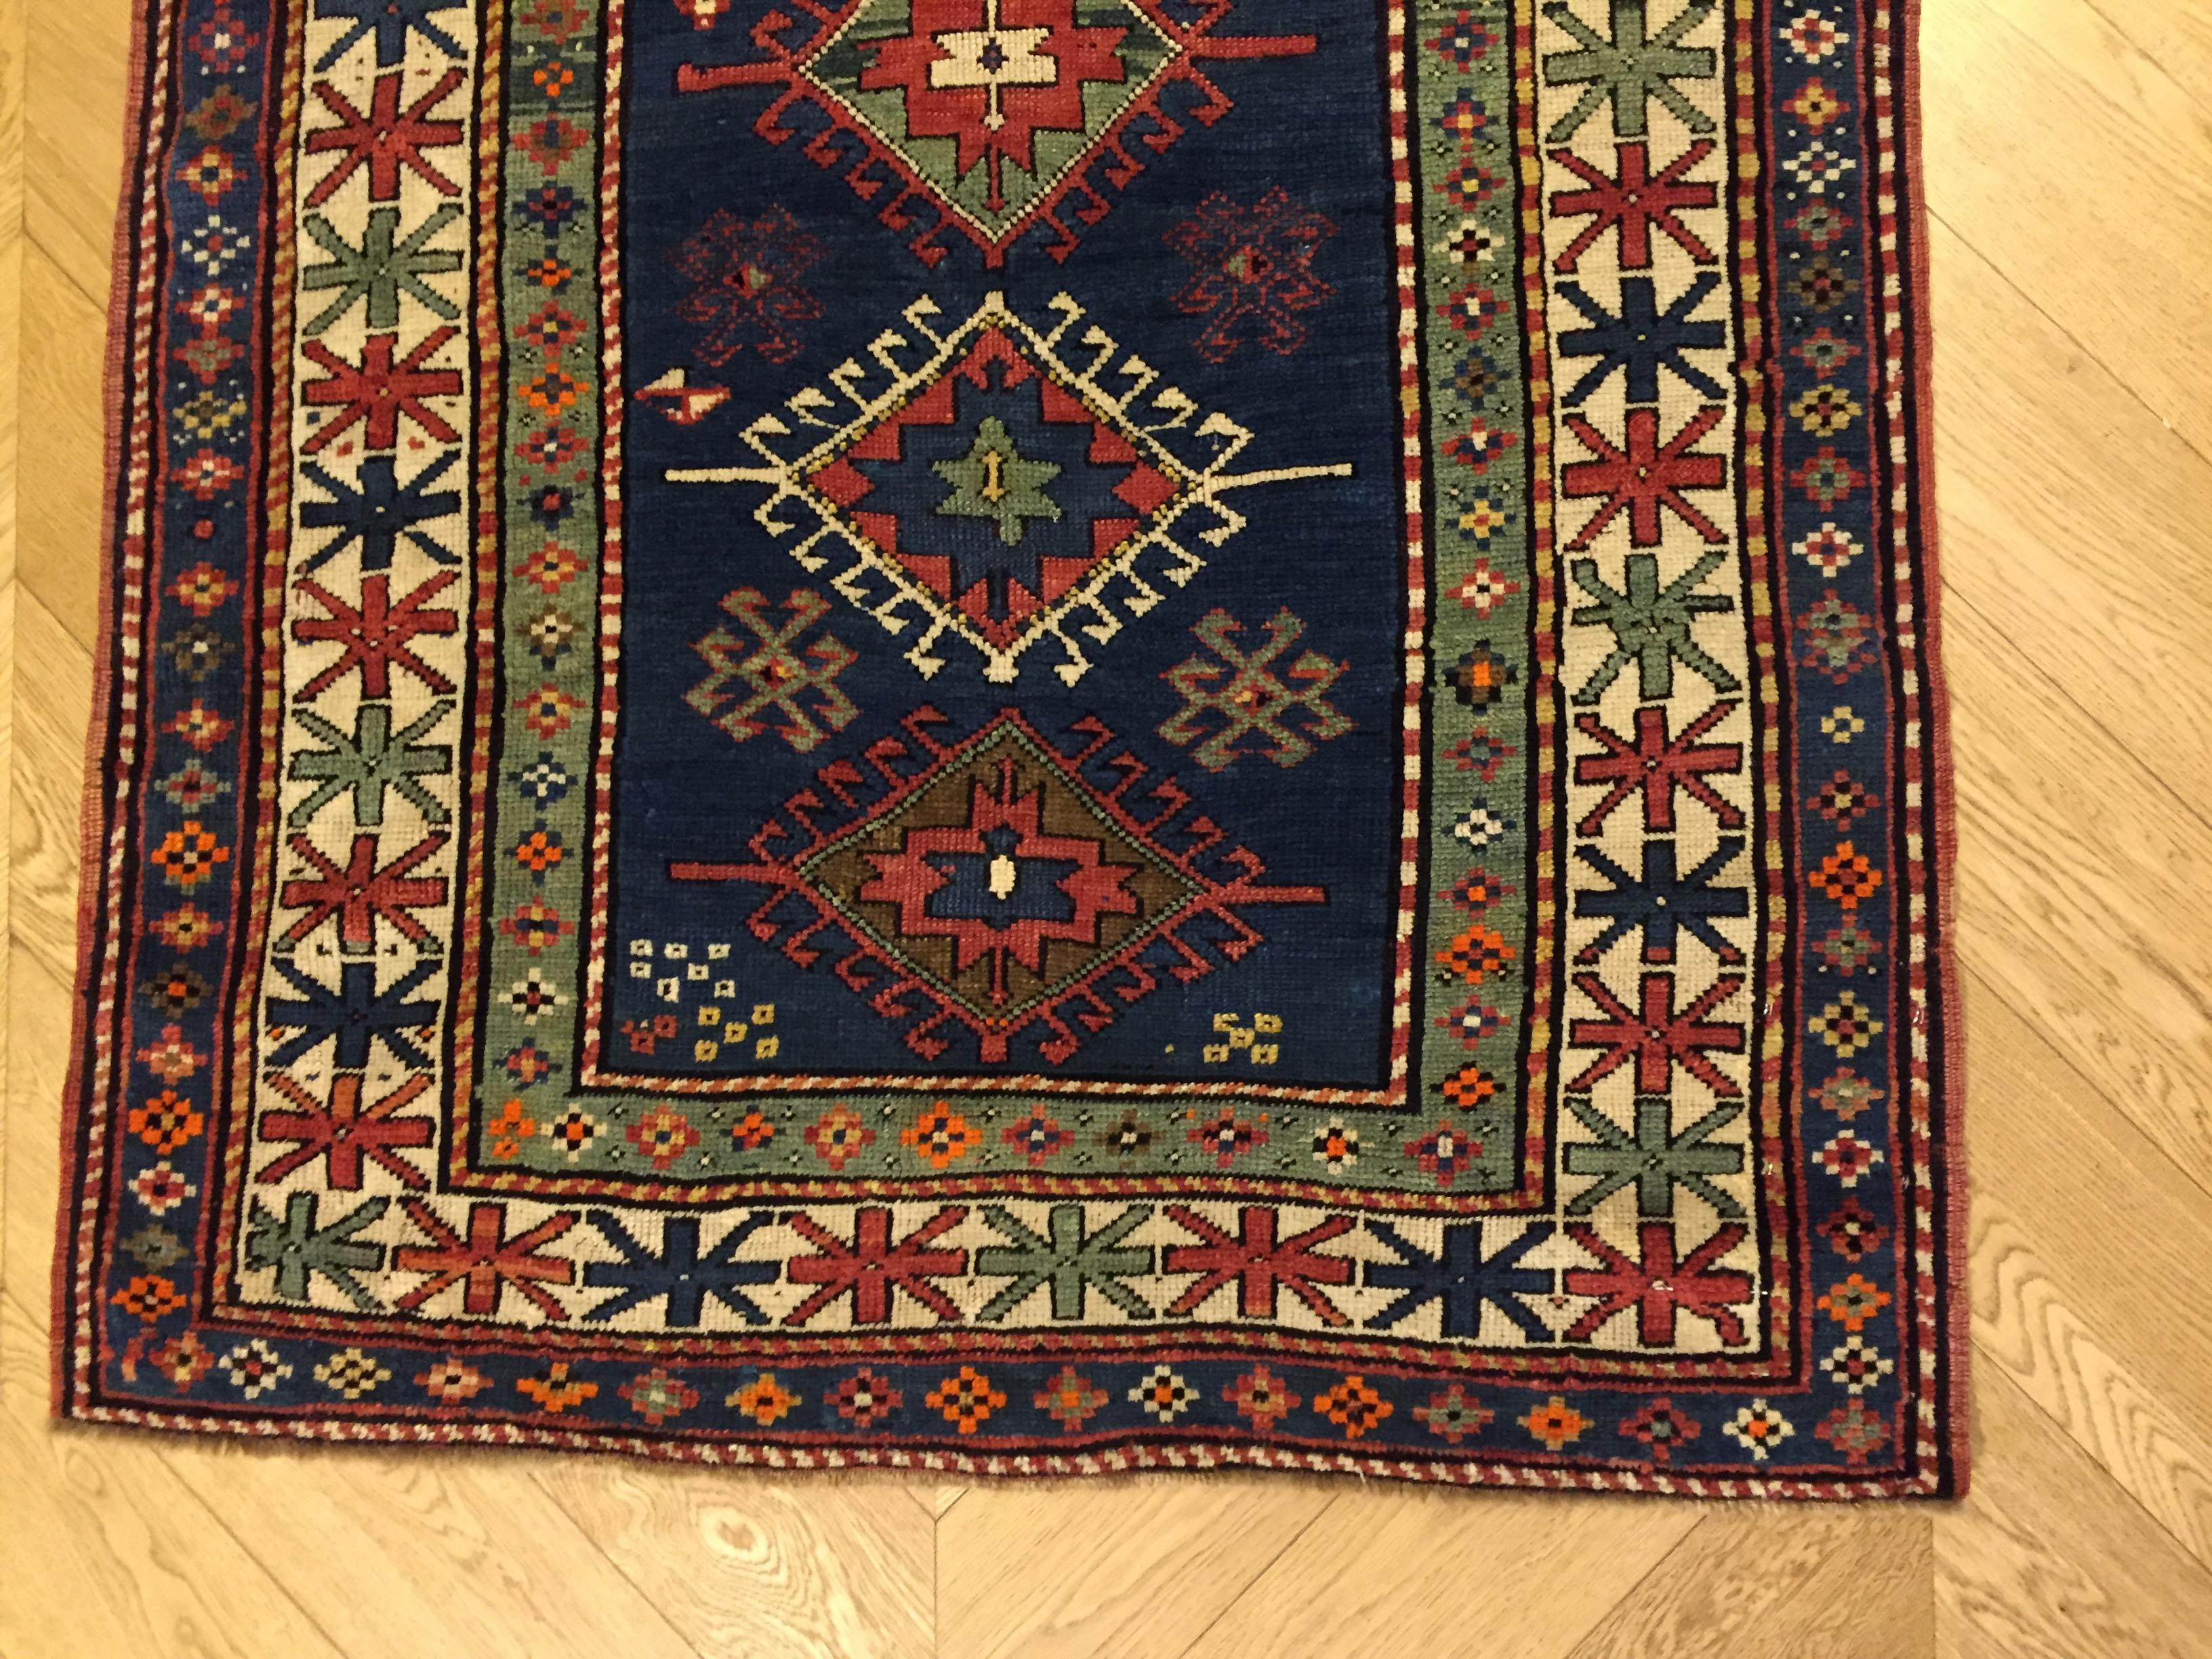 The ancient Kazaks come from a mountainous region located in the heart of the Caucasus. The name is given by the town of Kazakh, which is the main center of the region, where most probably these carpets were collected and sold. The ancient Kazaks